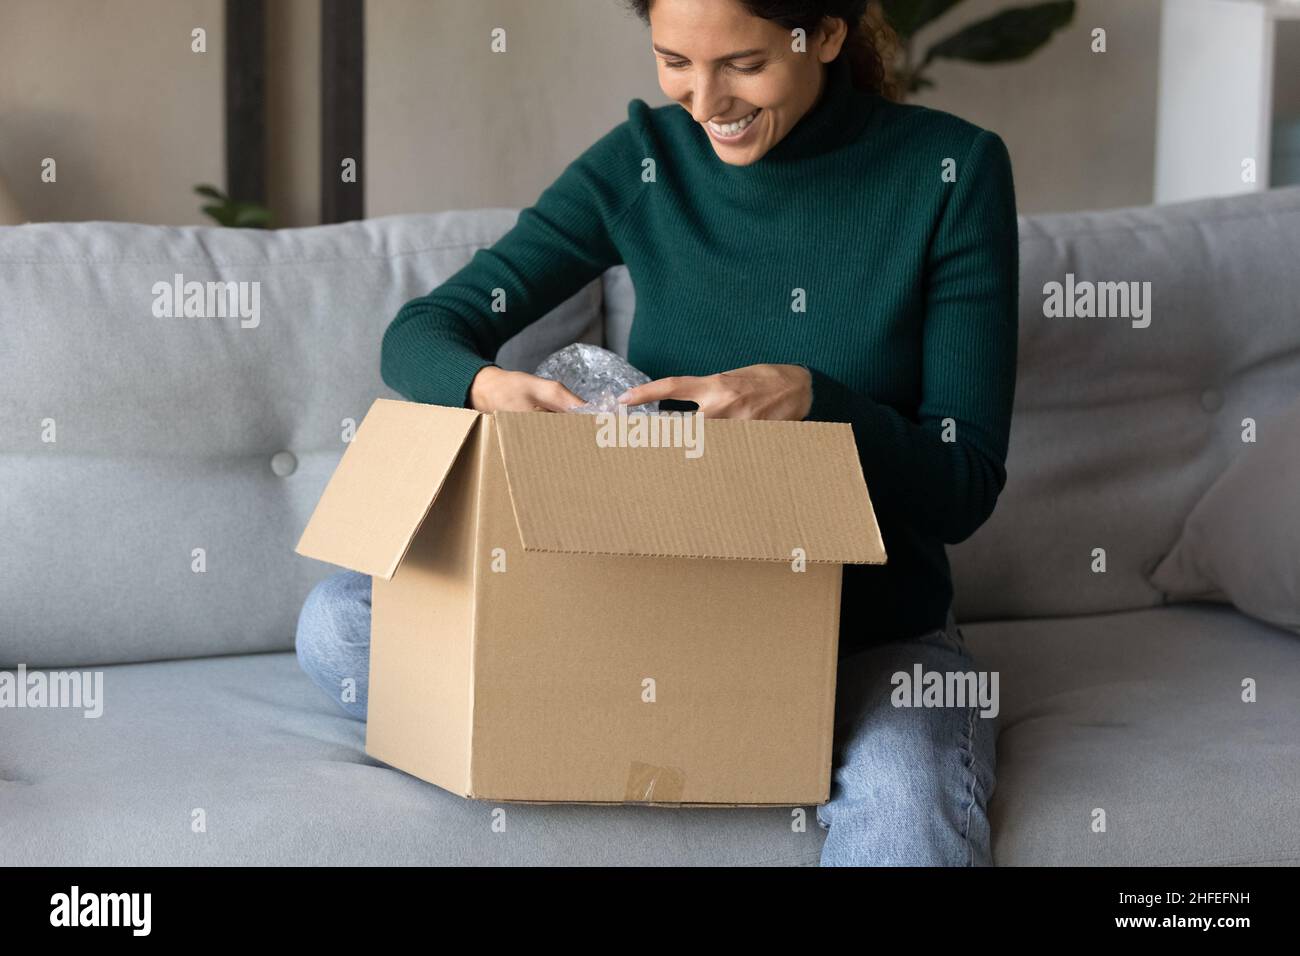 Happy millennial woman unpacking carton parcel at home. Stock Photo